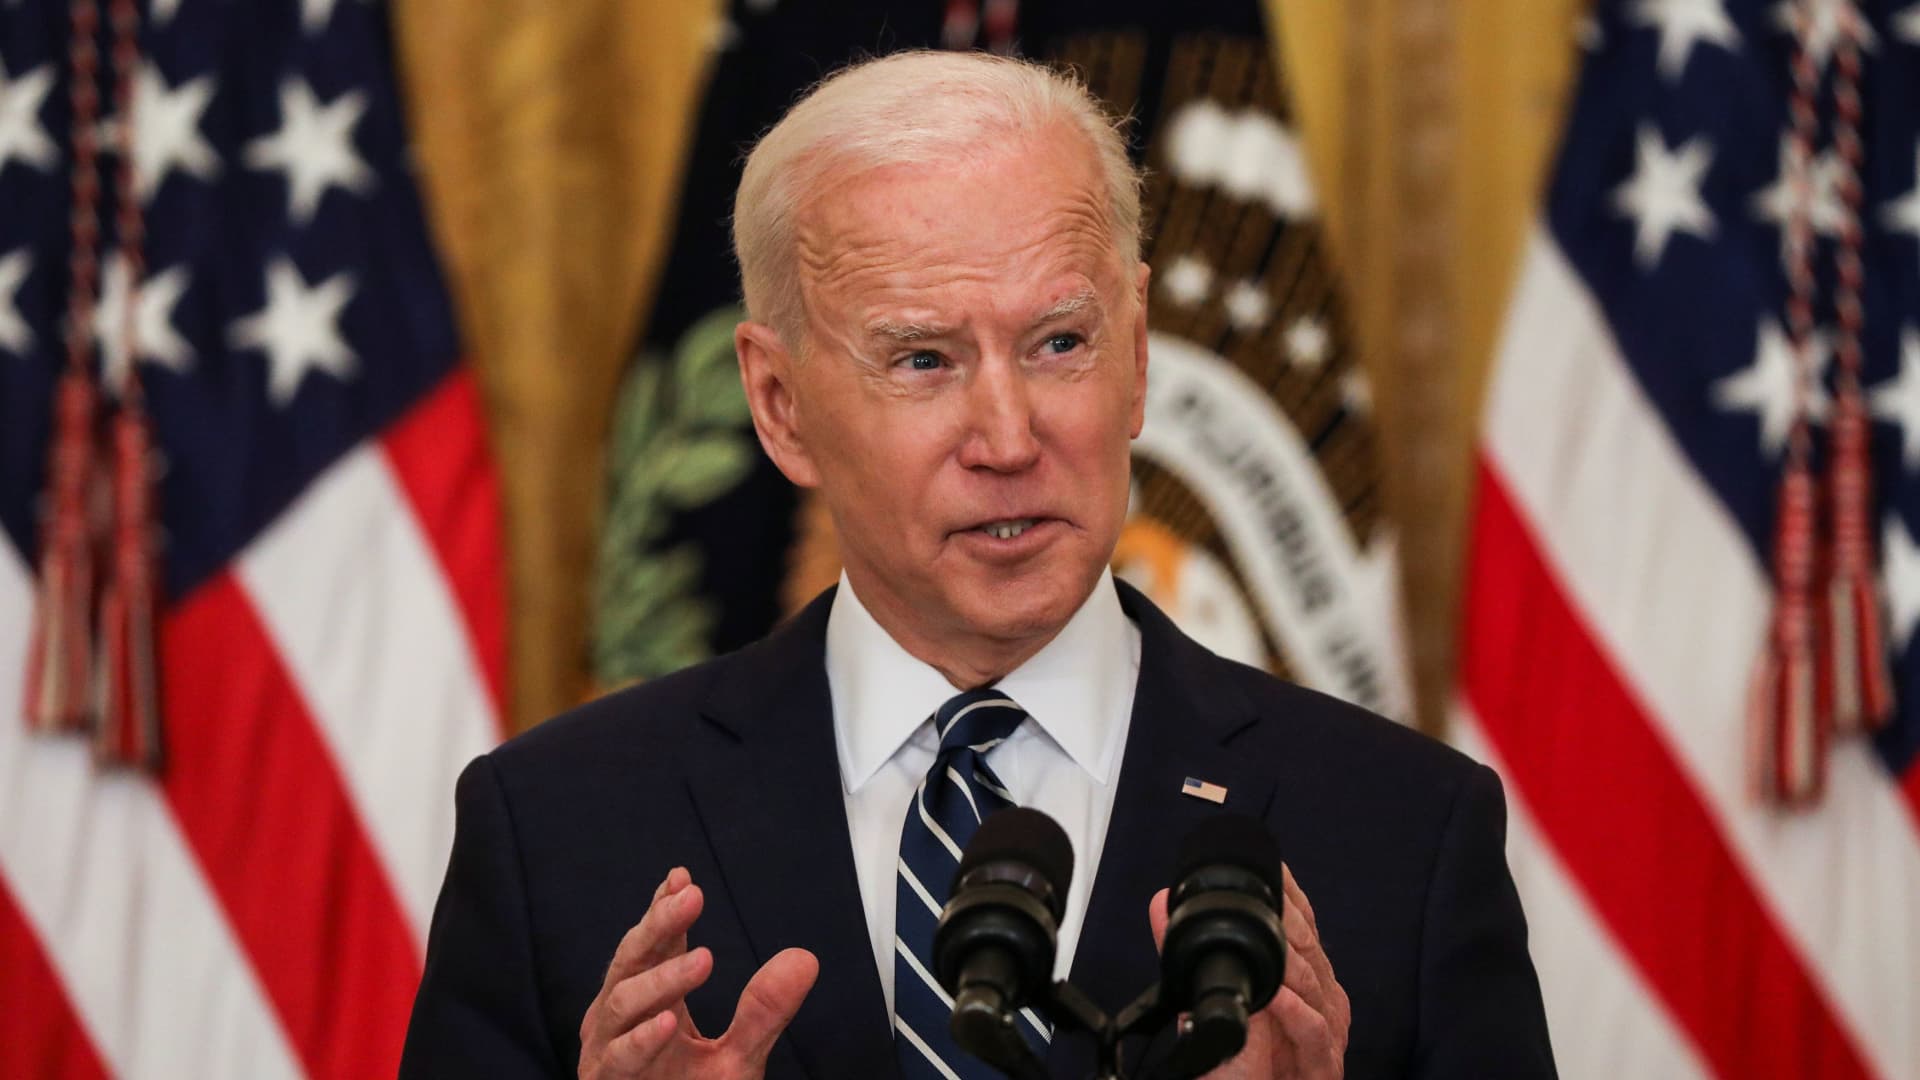 President Joe Biden holds his first formal news conference in the East Room of the White House in Washington, U.S., March 25, 2021.